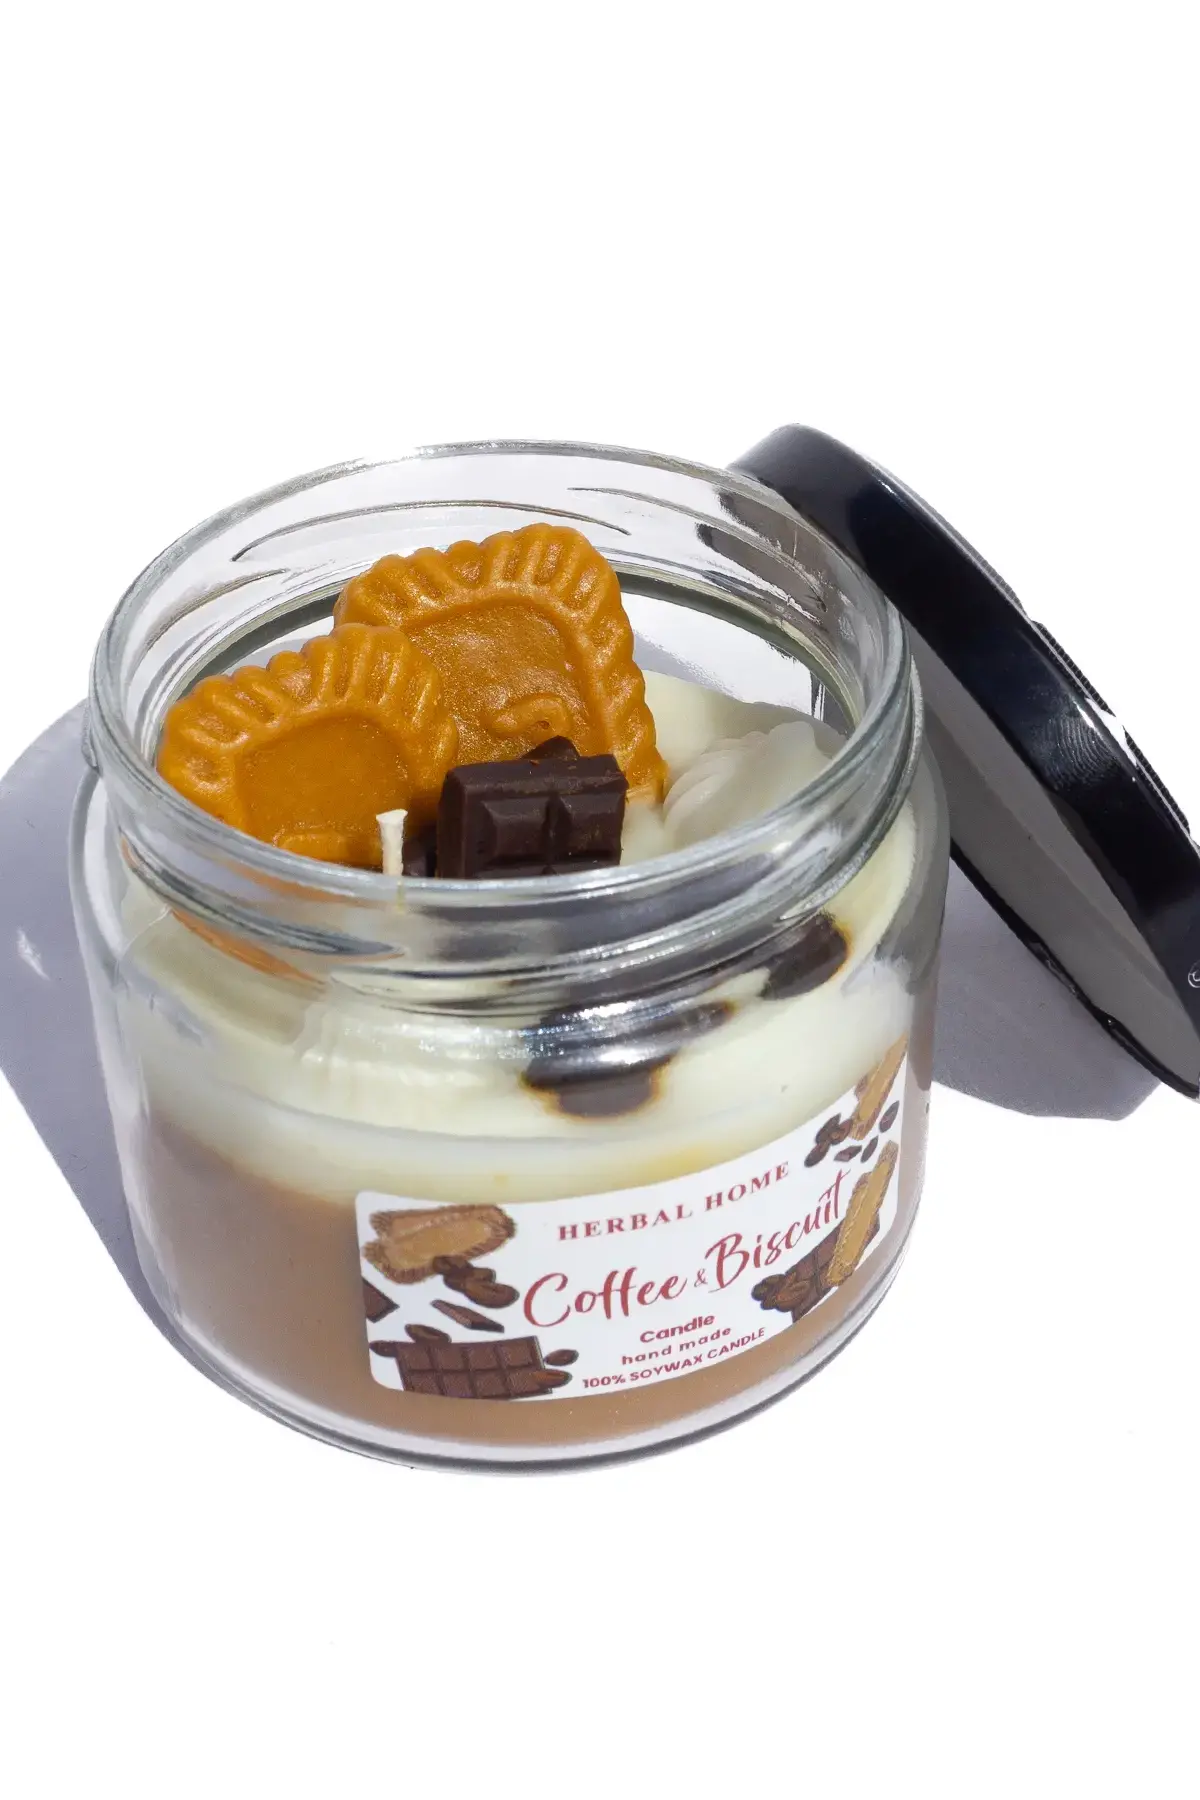 HERBAL HOME Coffee and Biscuit Candle 220 GR - 7